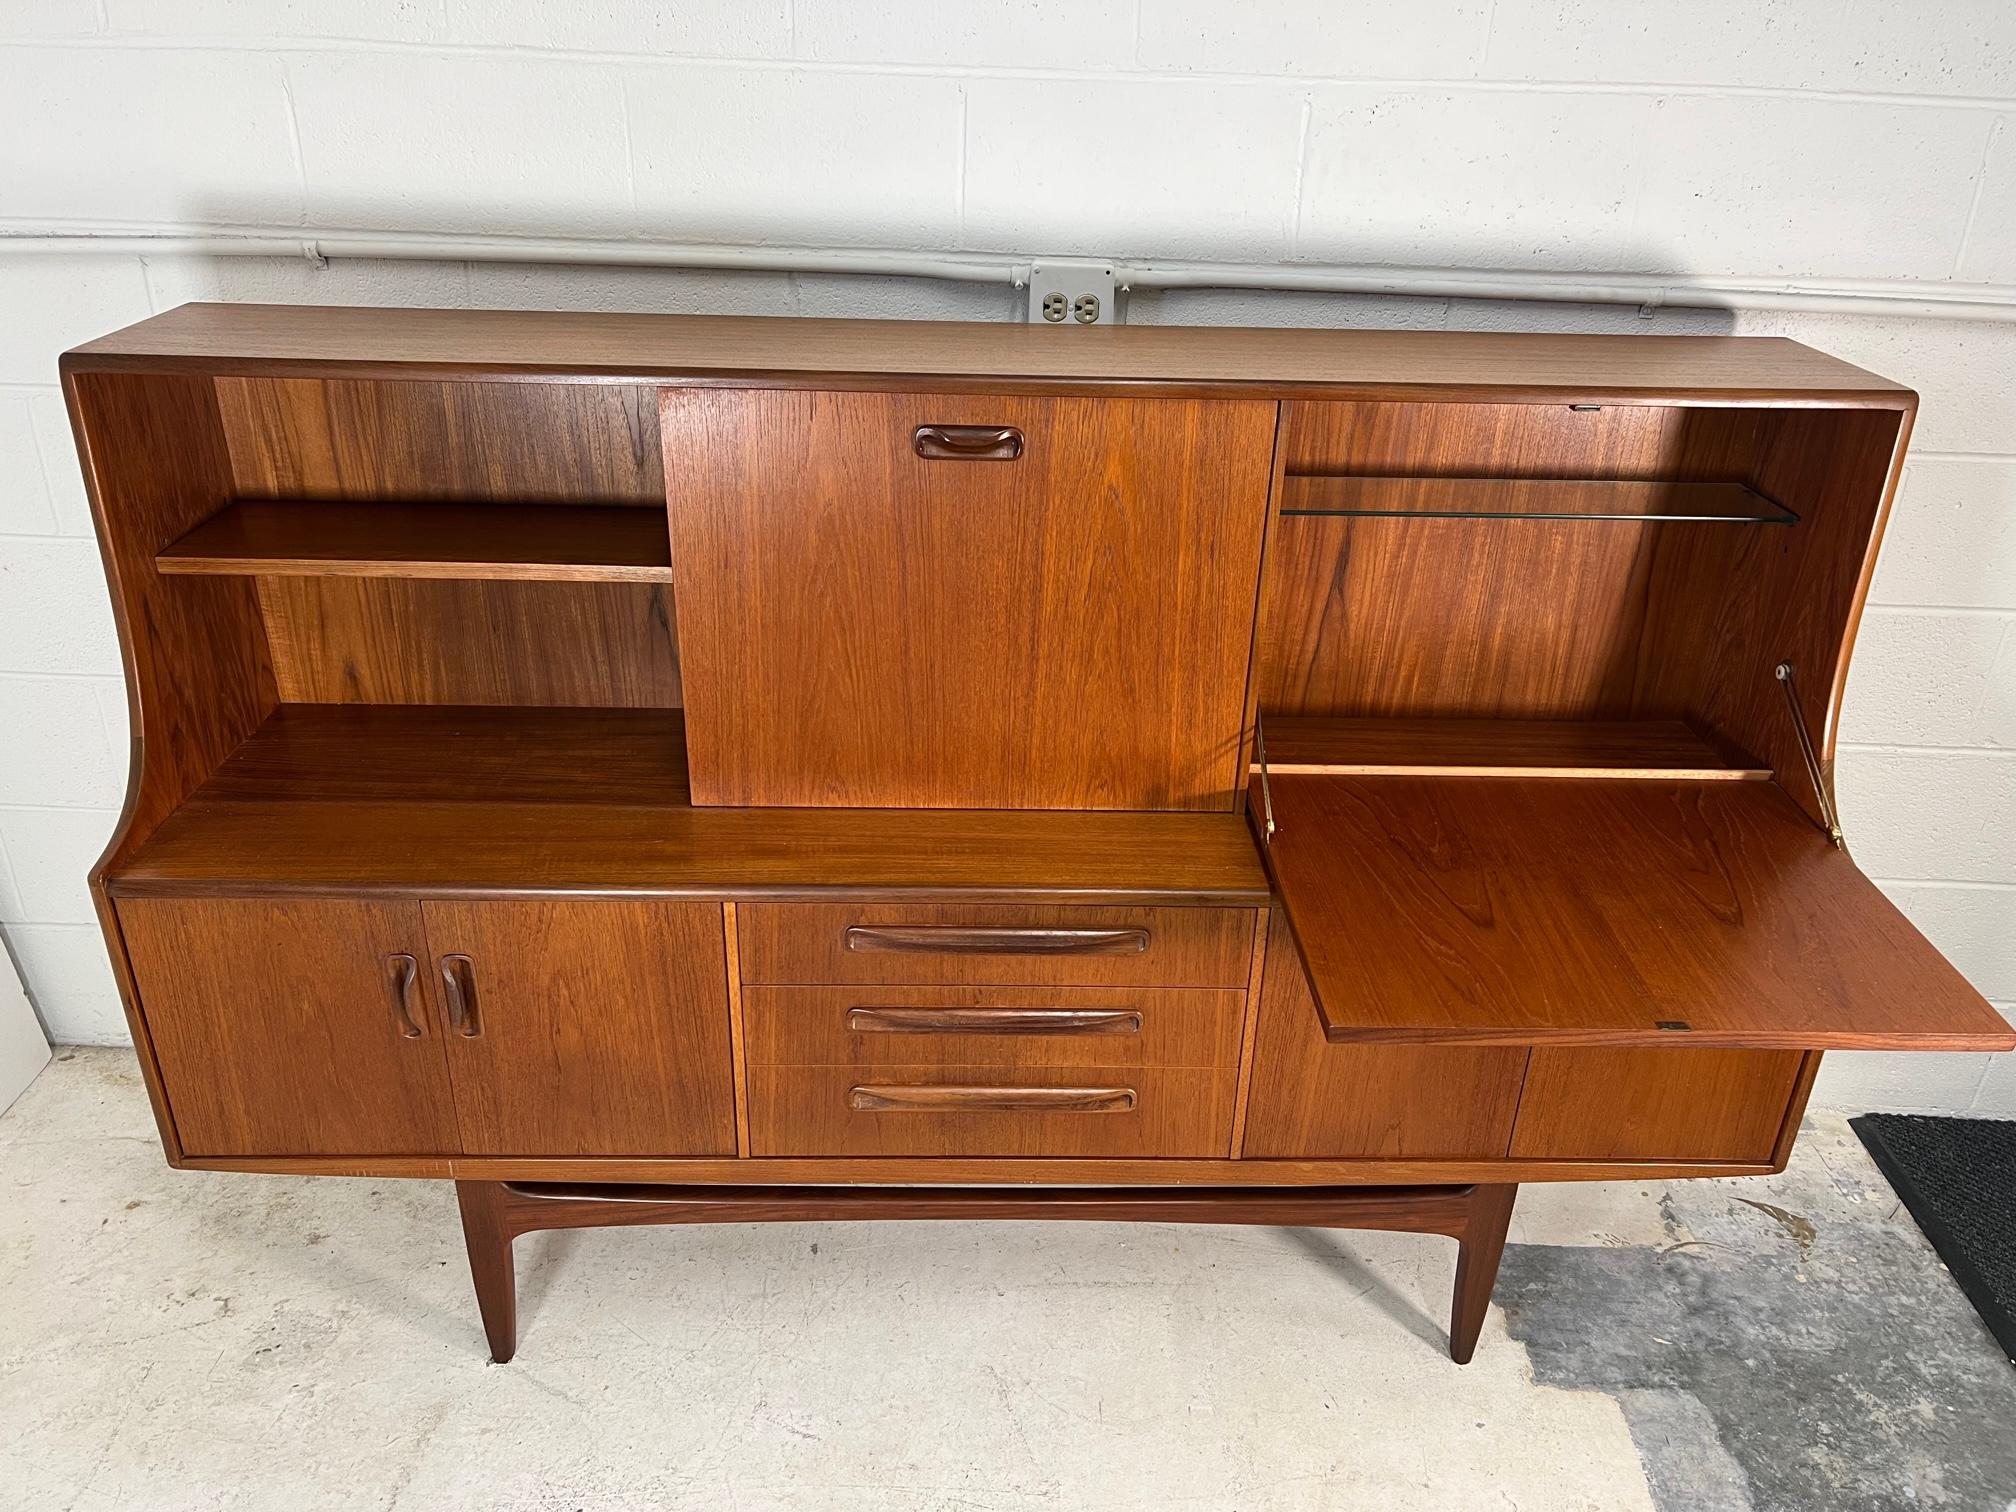 Mid-Century Modern versatile high board by G Plan. Featuring a sliding door and a small drop down desk that can comfortably hold a laptop or be used as a wine bar. Shelves are adjustable. Unfinished back.

Excellent condition. Very minor marks and